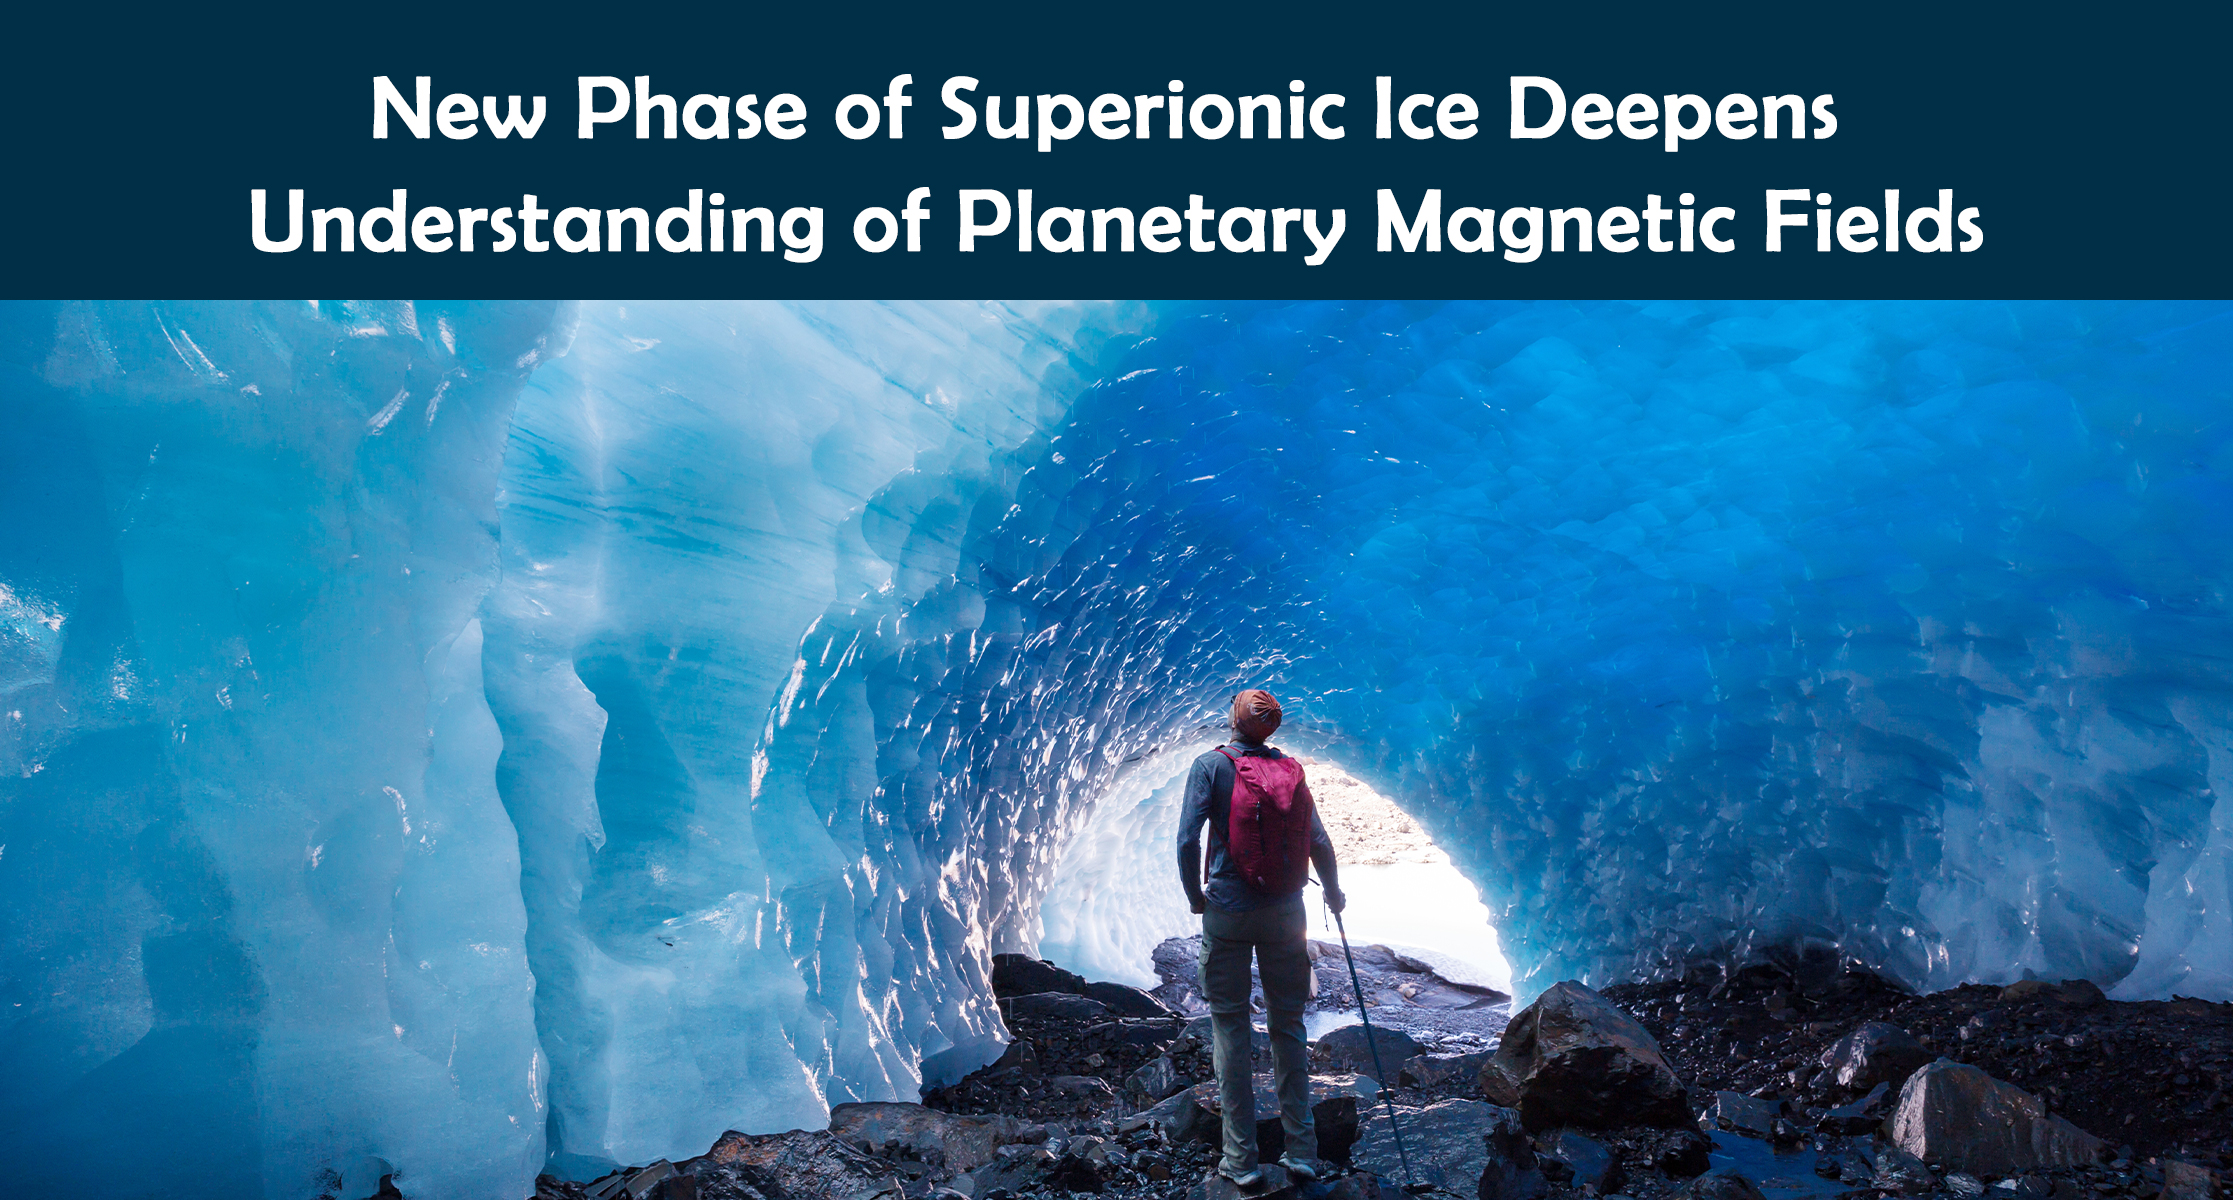 New Phase of Superionic Ice Deepens Understanding of Planetary Magnetic Fields